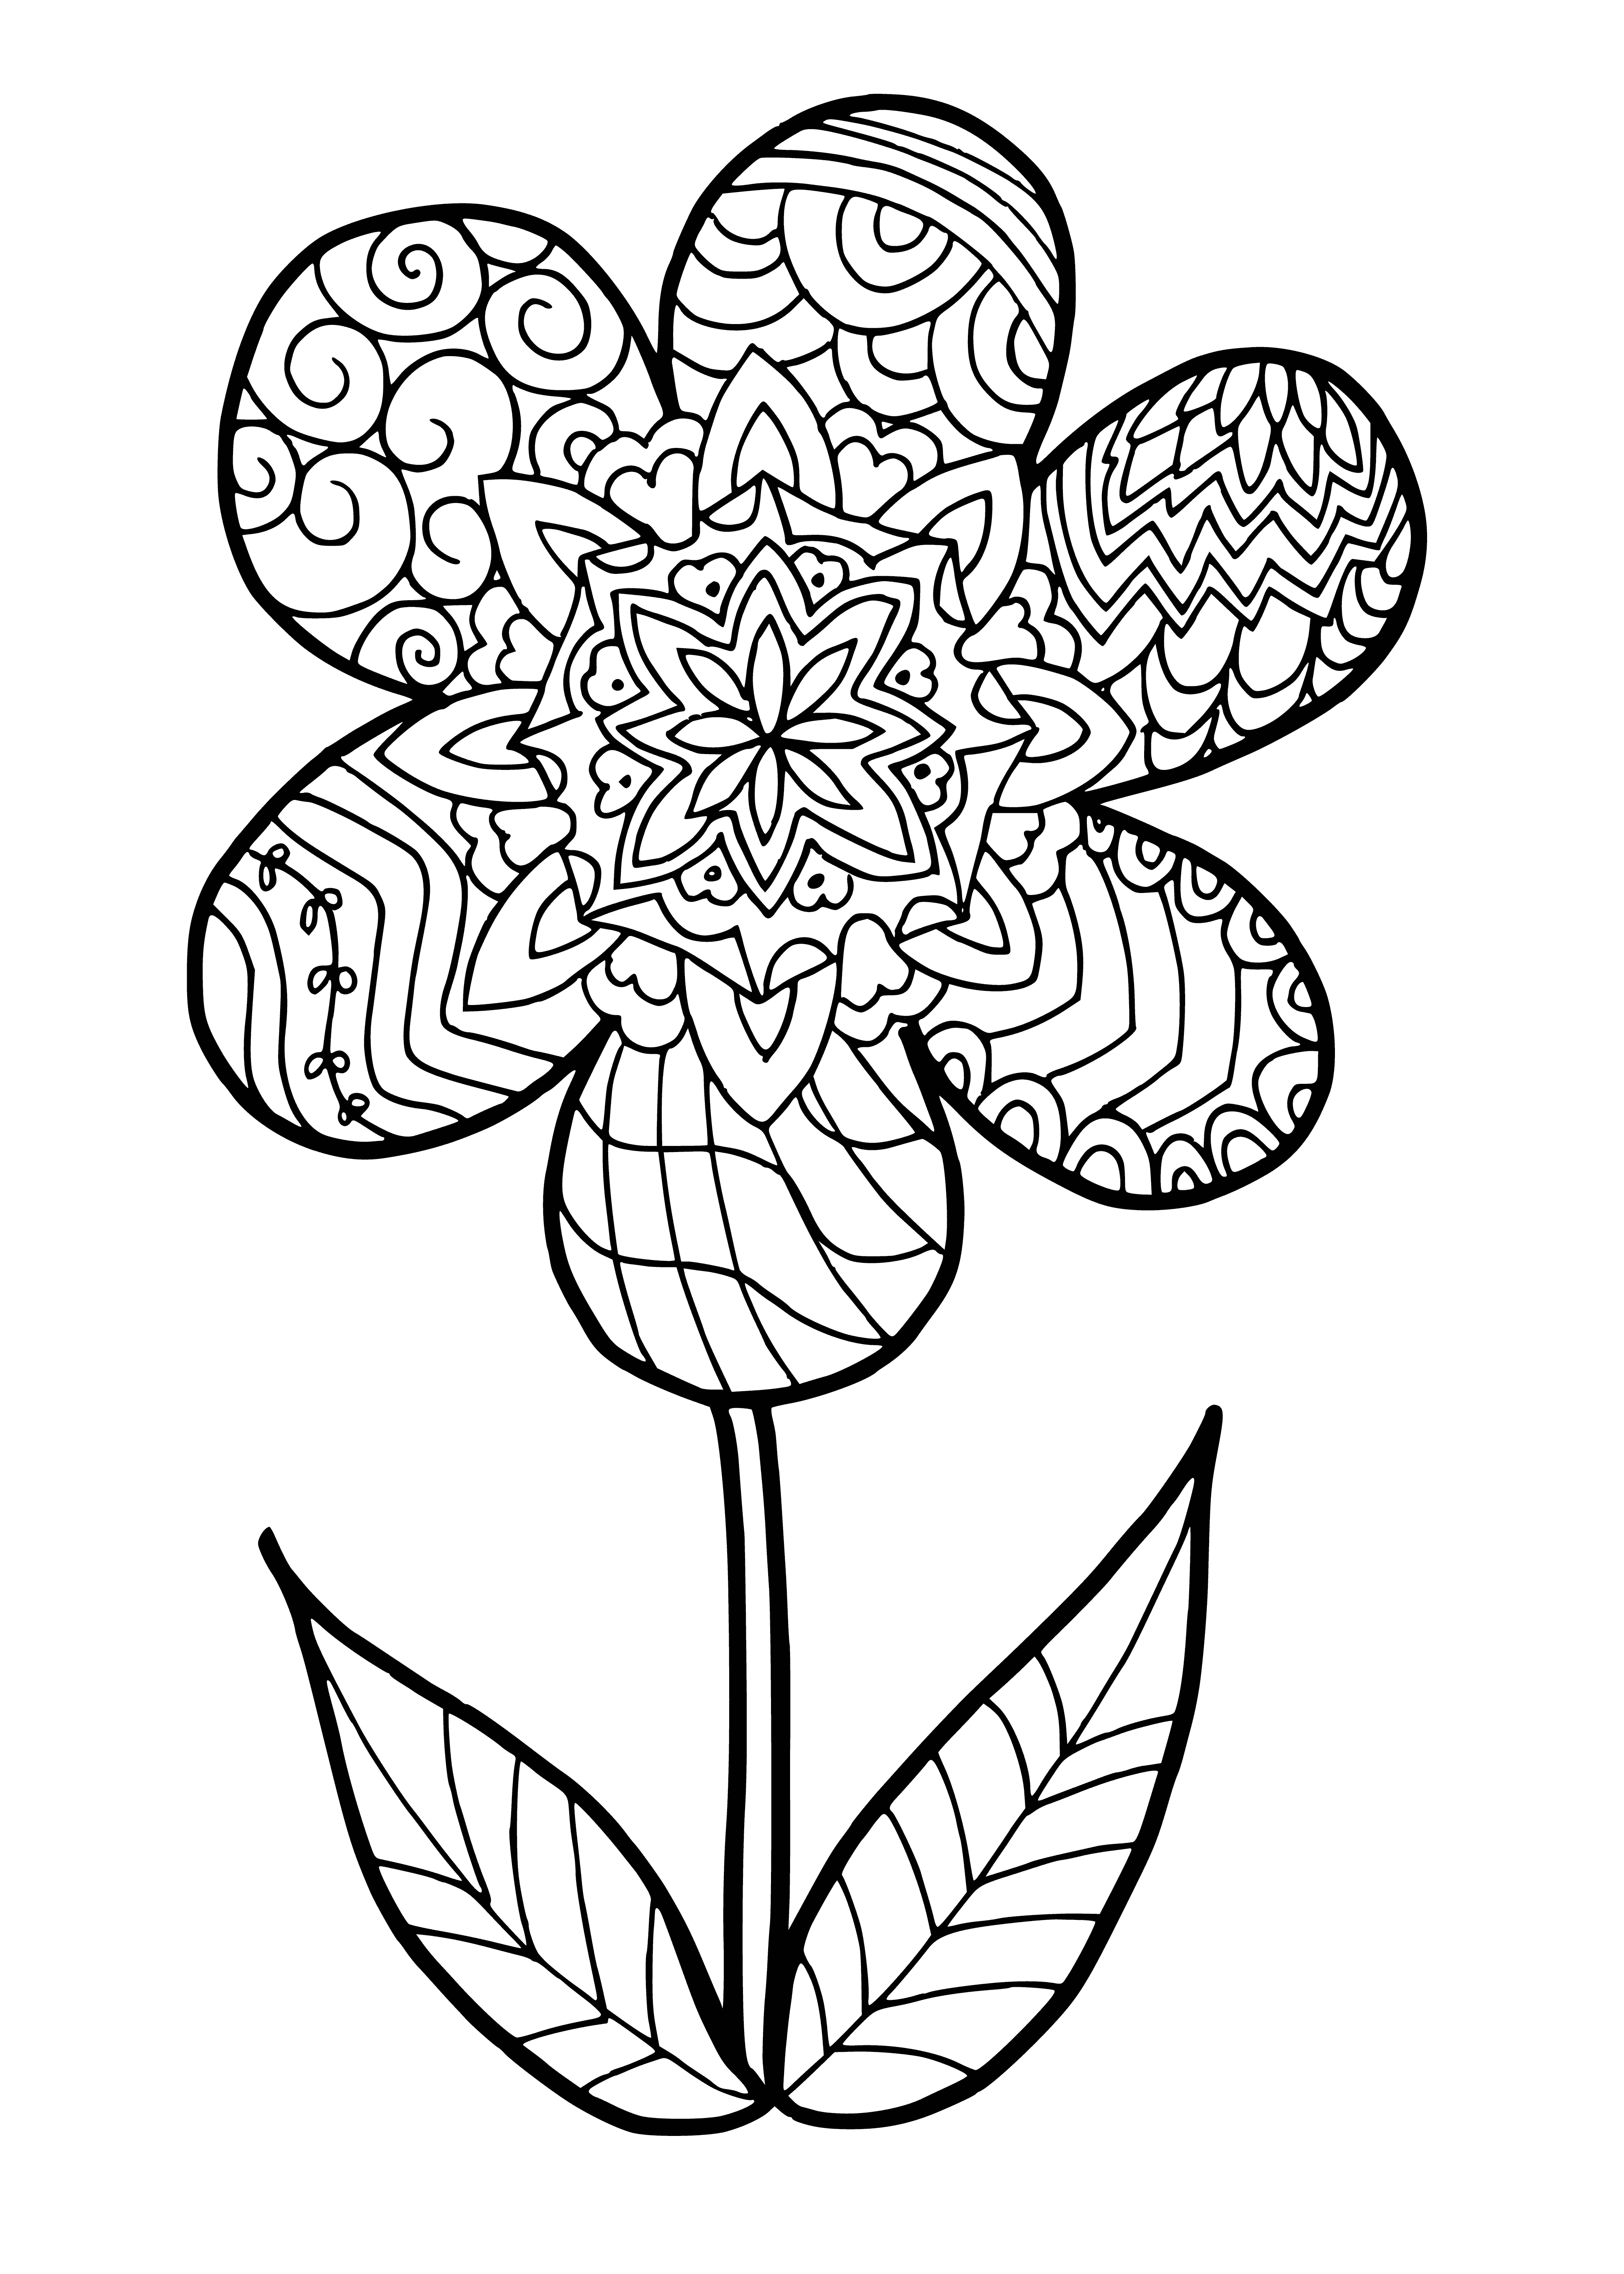 coloring page: A yellow flower with green stem and leaves to be colored in. #coloring #flower